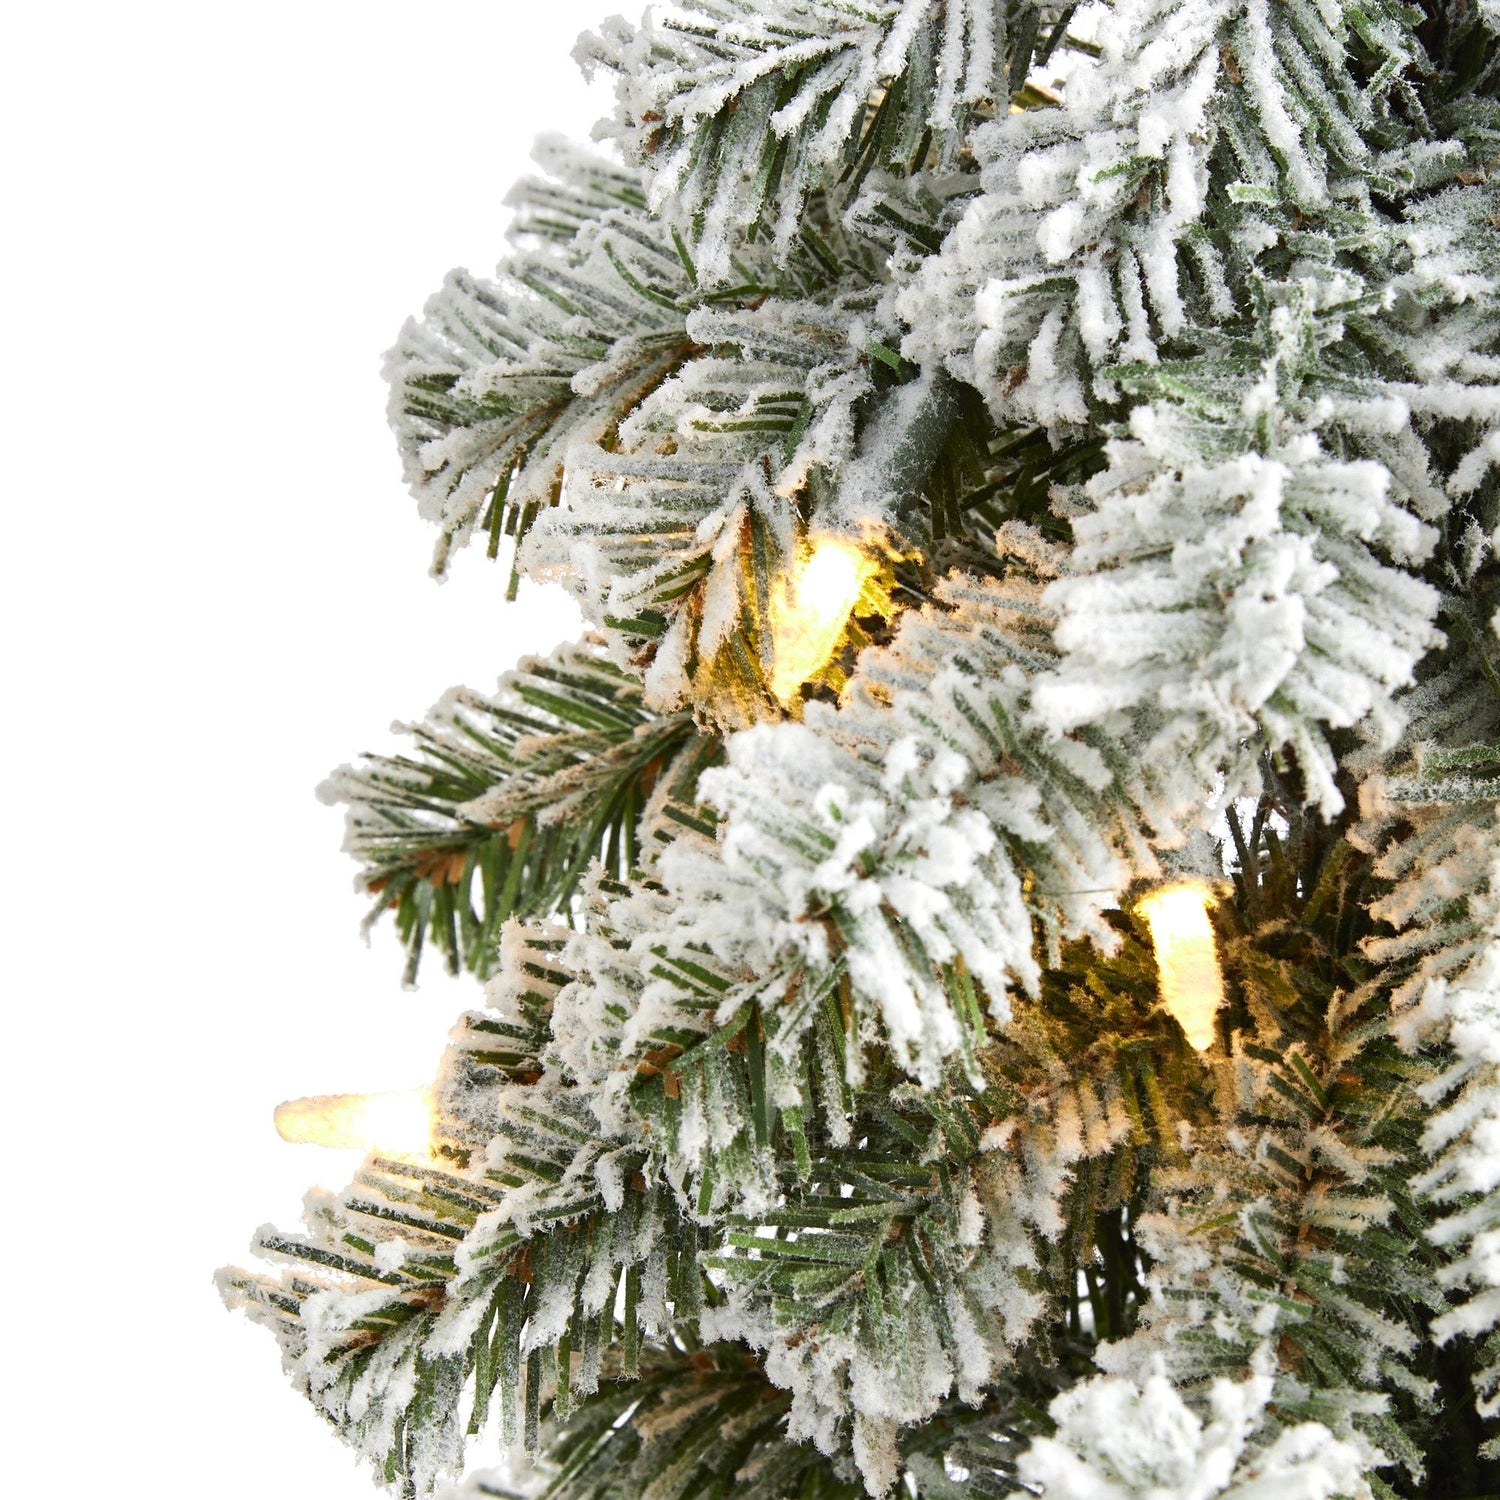 3’ Flocked Alpine Artificial Christmas Tree with 50 Lights, 177 Bendable Branches and a Burlap Planter